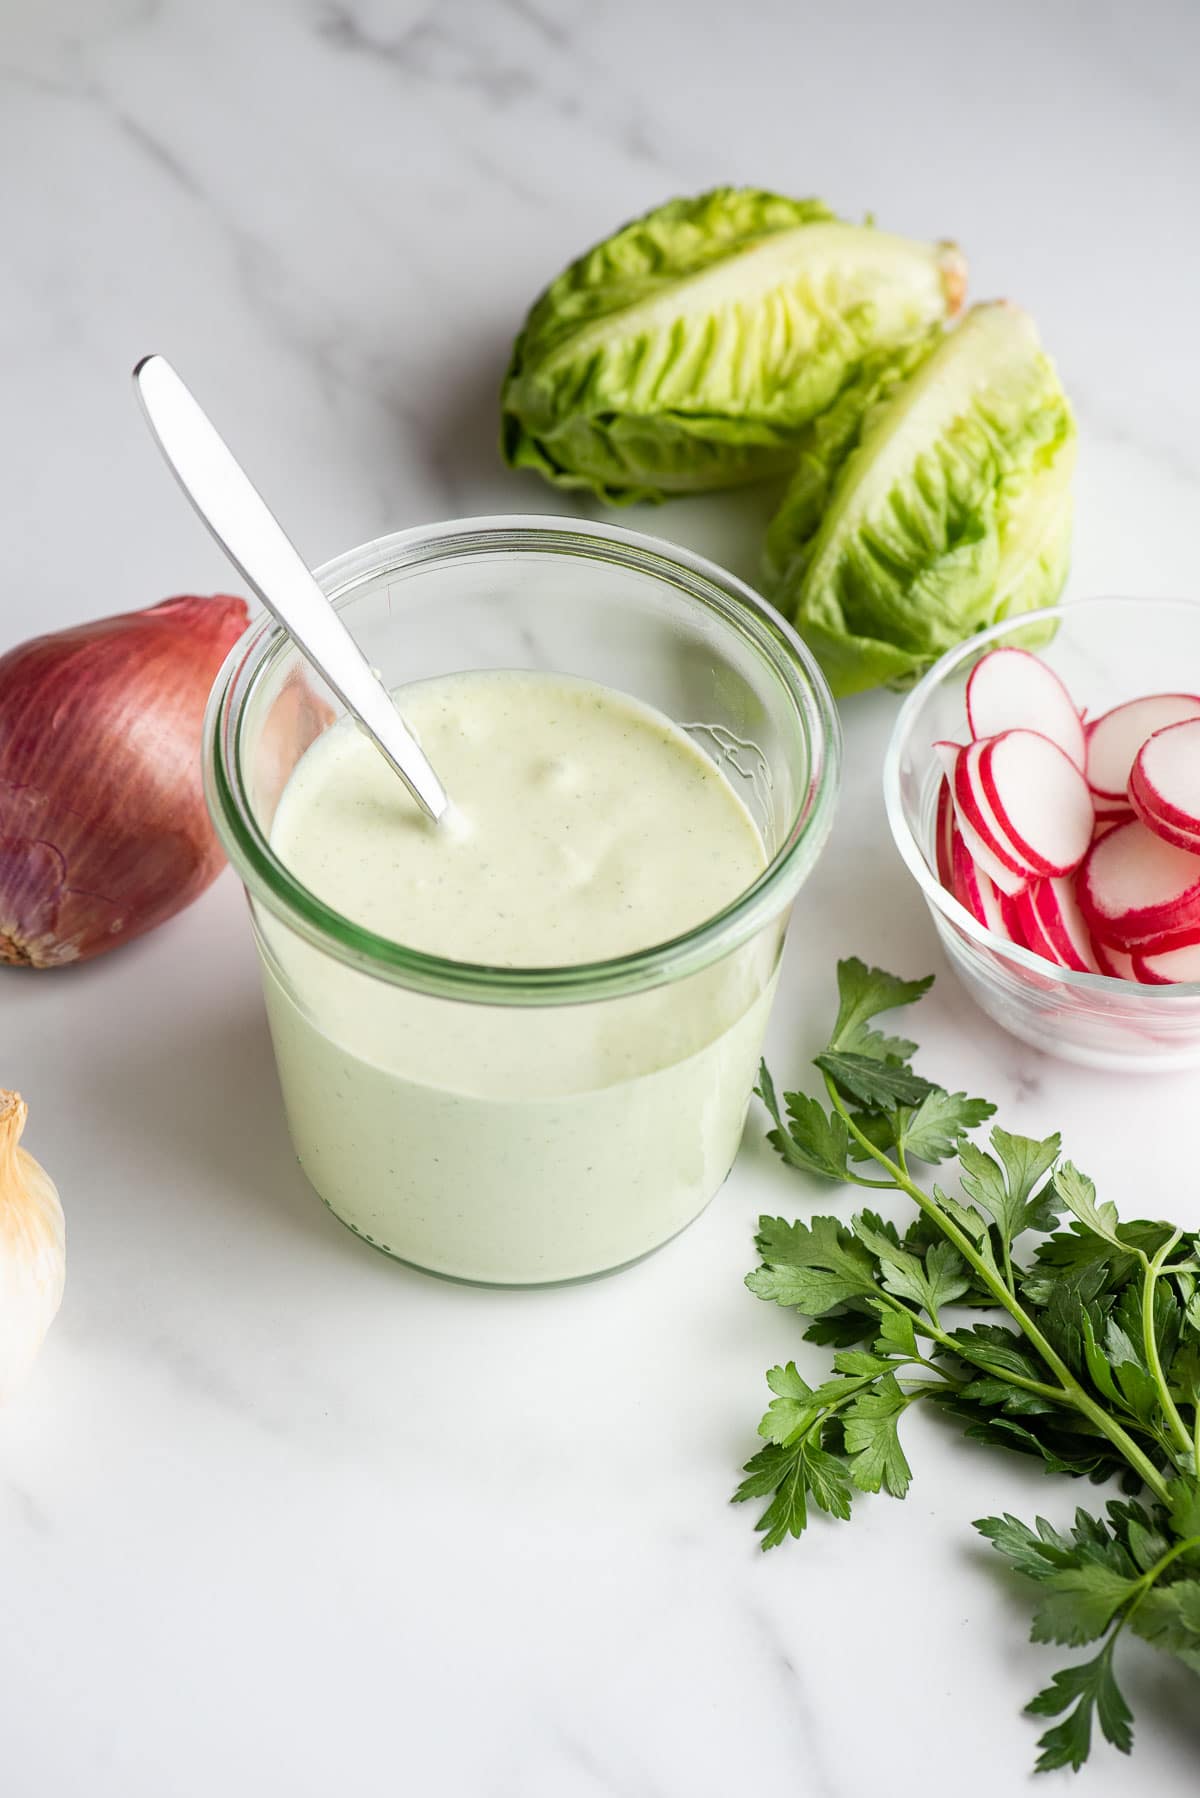 Green Goddess Dressing in a jar with spoon and fresh herbs and vegetables